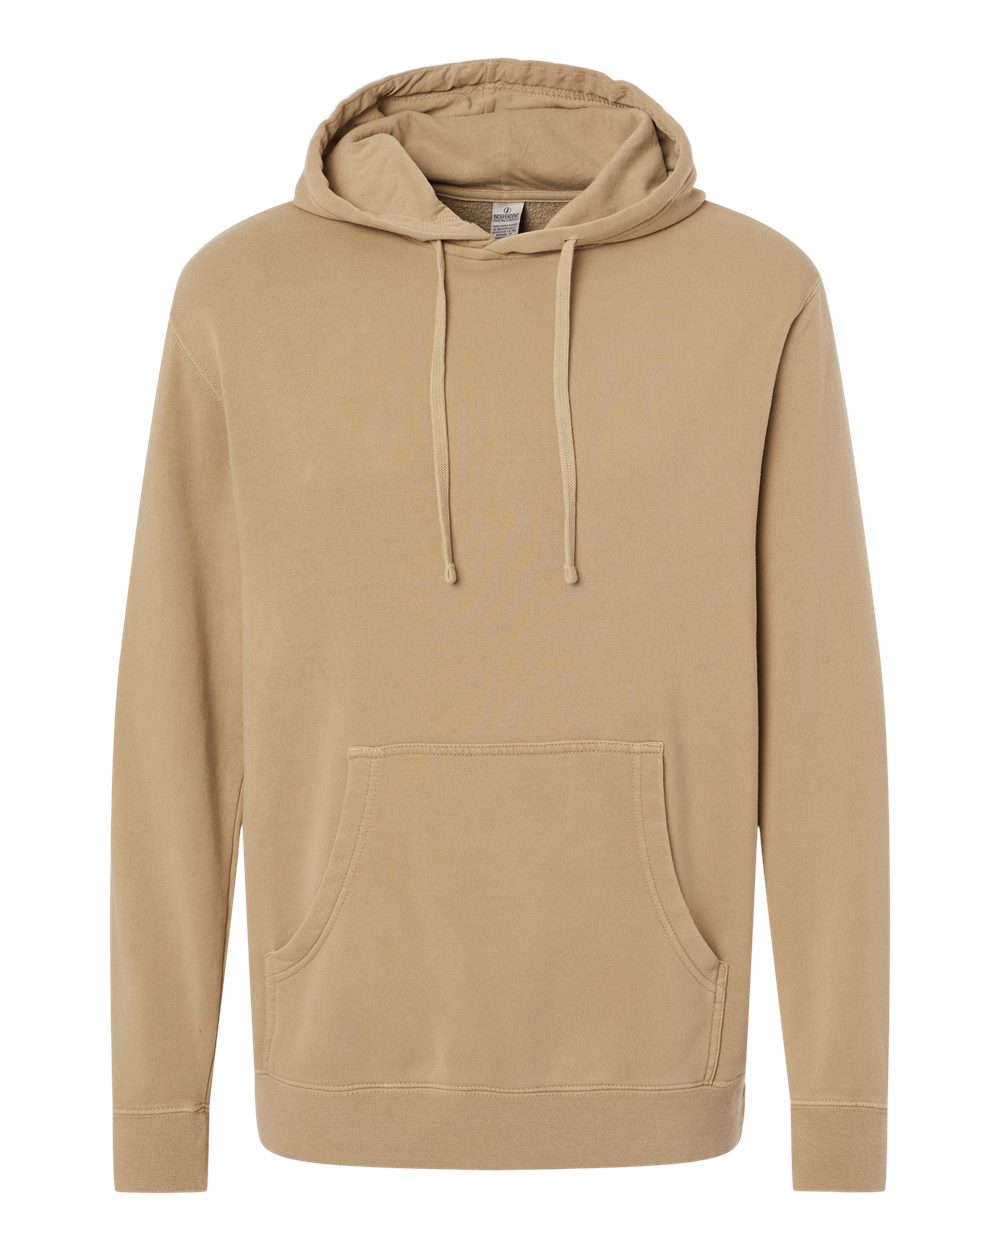 Independent Pigment-Dyed Hoodie (PRM4500) in Pigment Sandstone